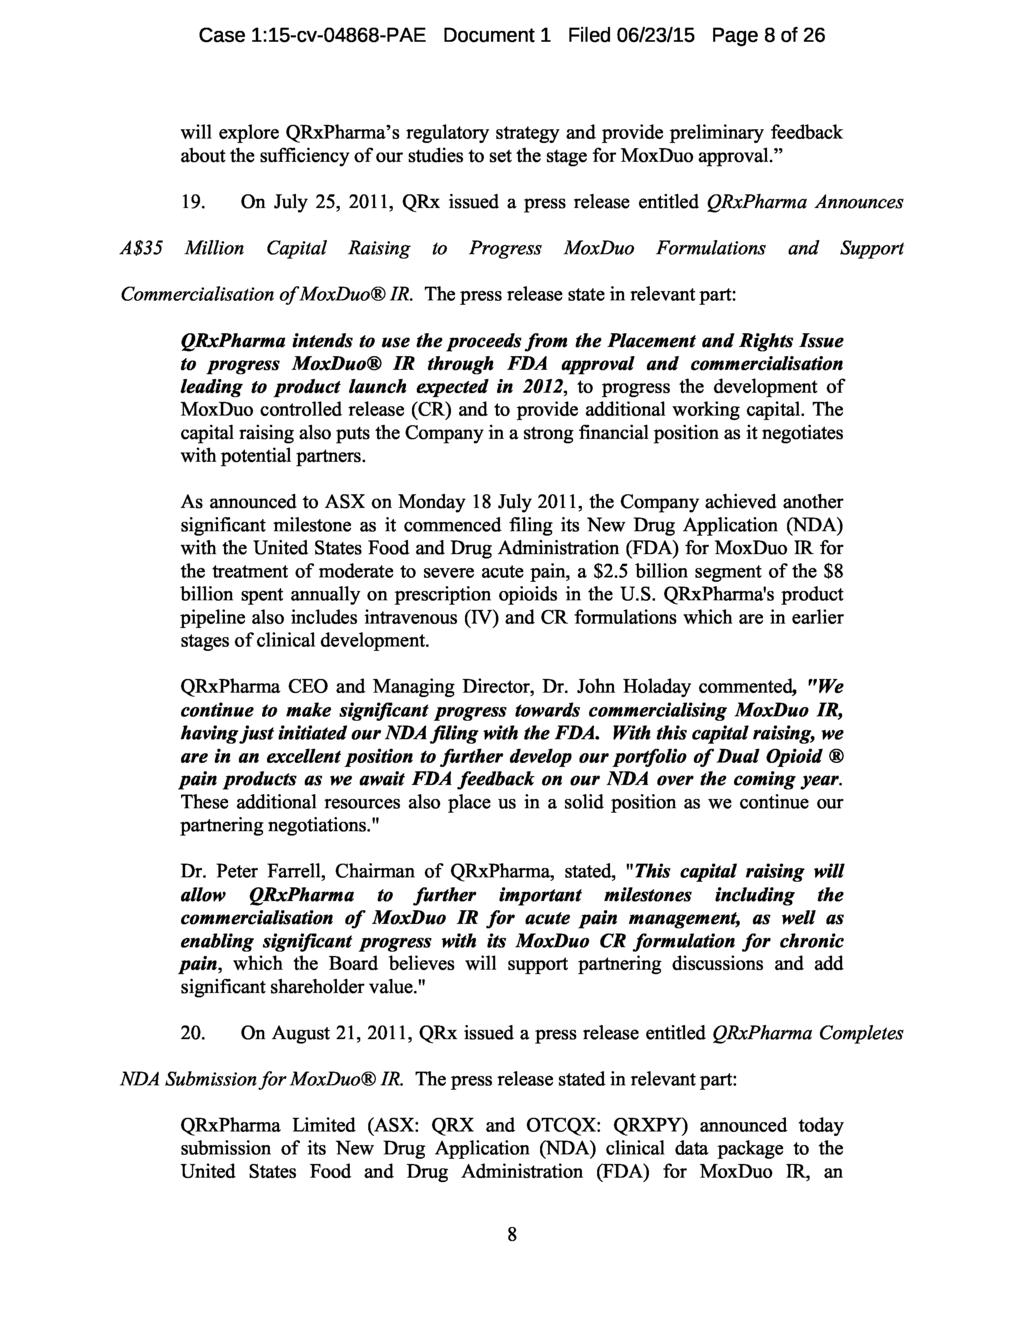 Case 1:15-cv-04868-PAE Document 1 Filed 06/23/15 Page 8 of 26 will explore QRxPharma s regulatory strategy and provide preliminary feedback about the sufficiency of our studies to set the stage for